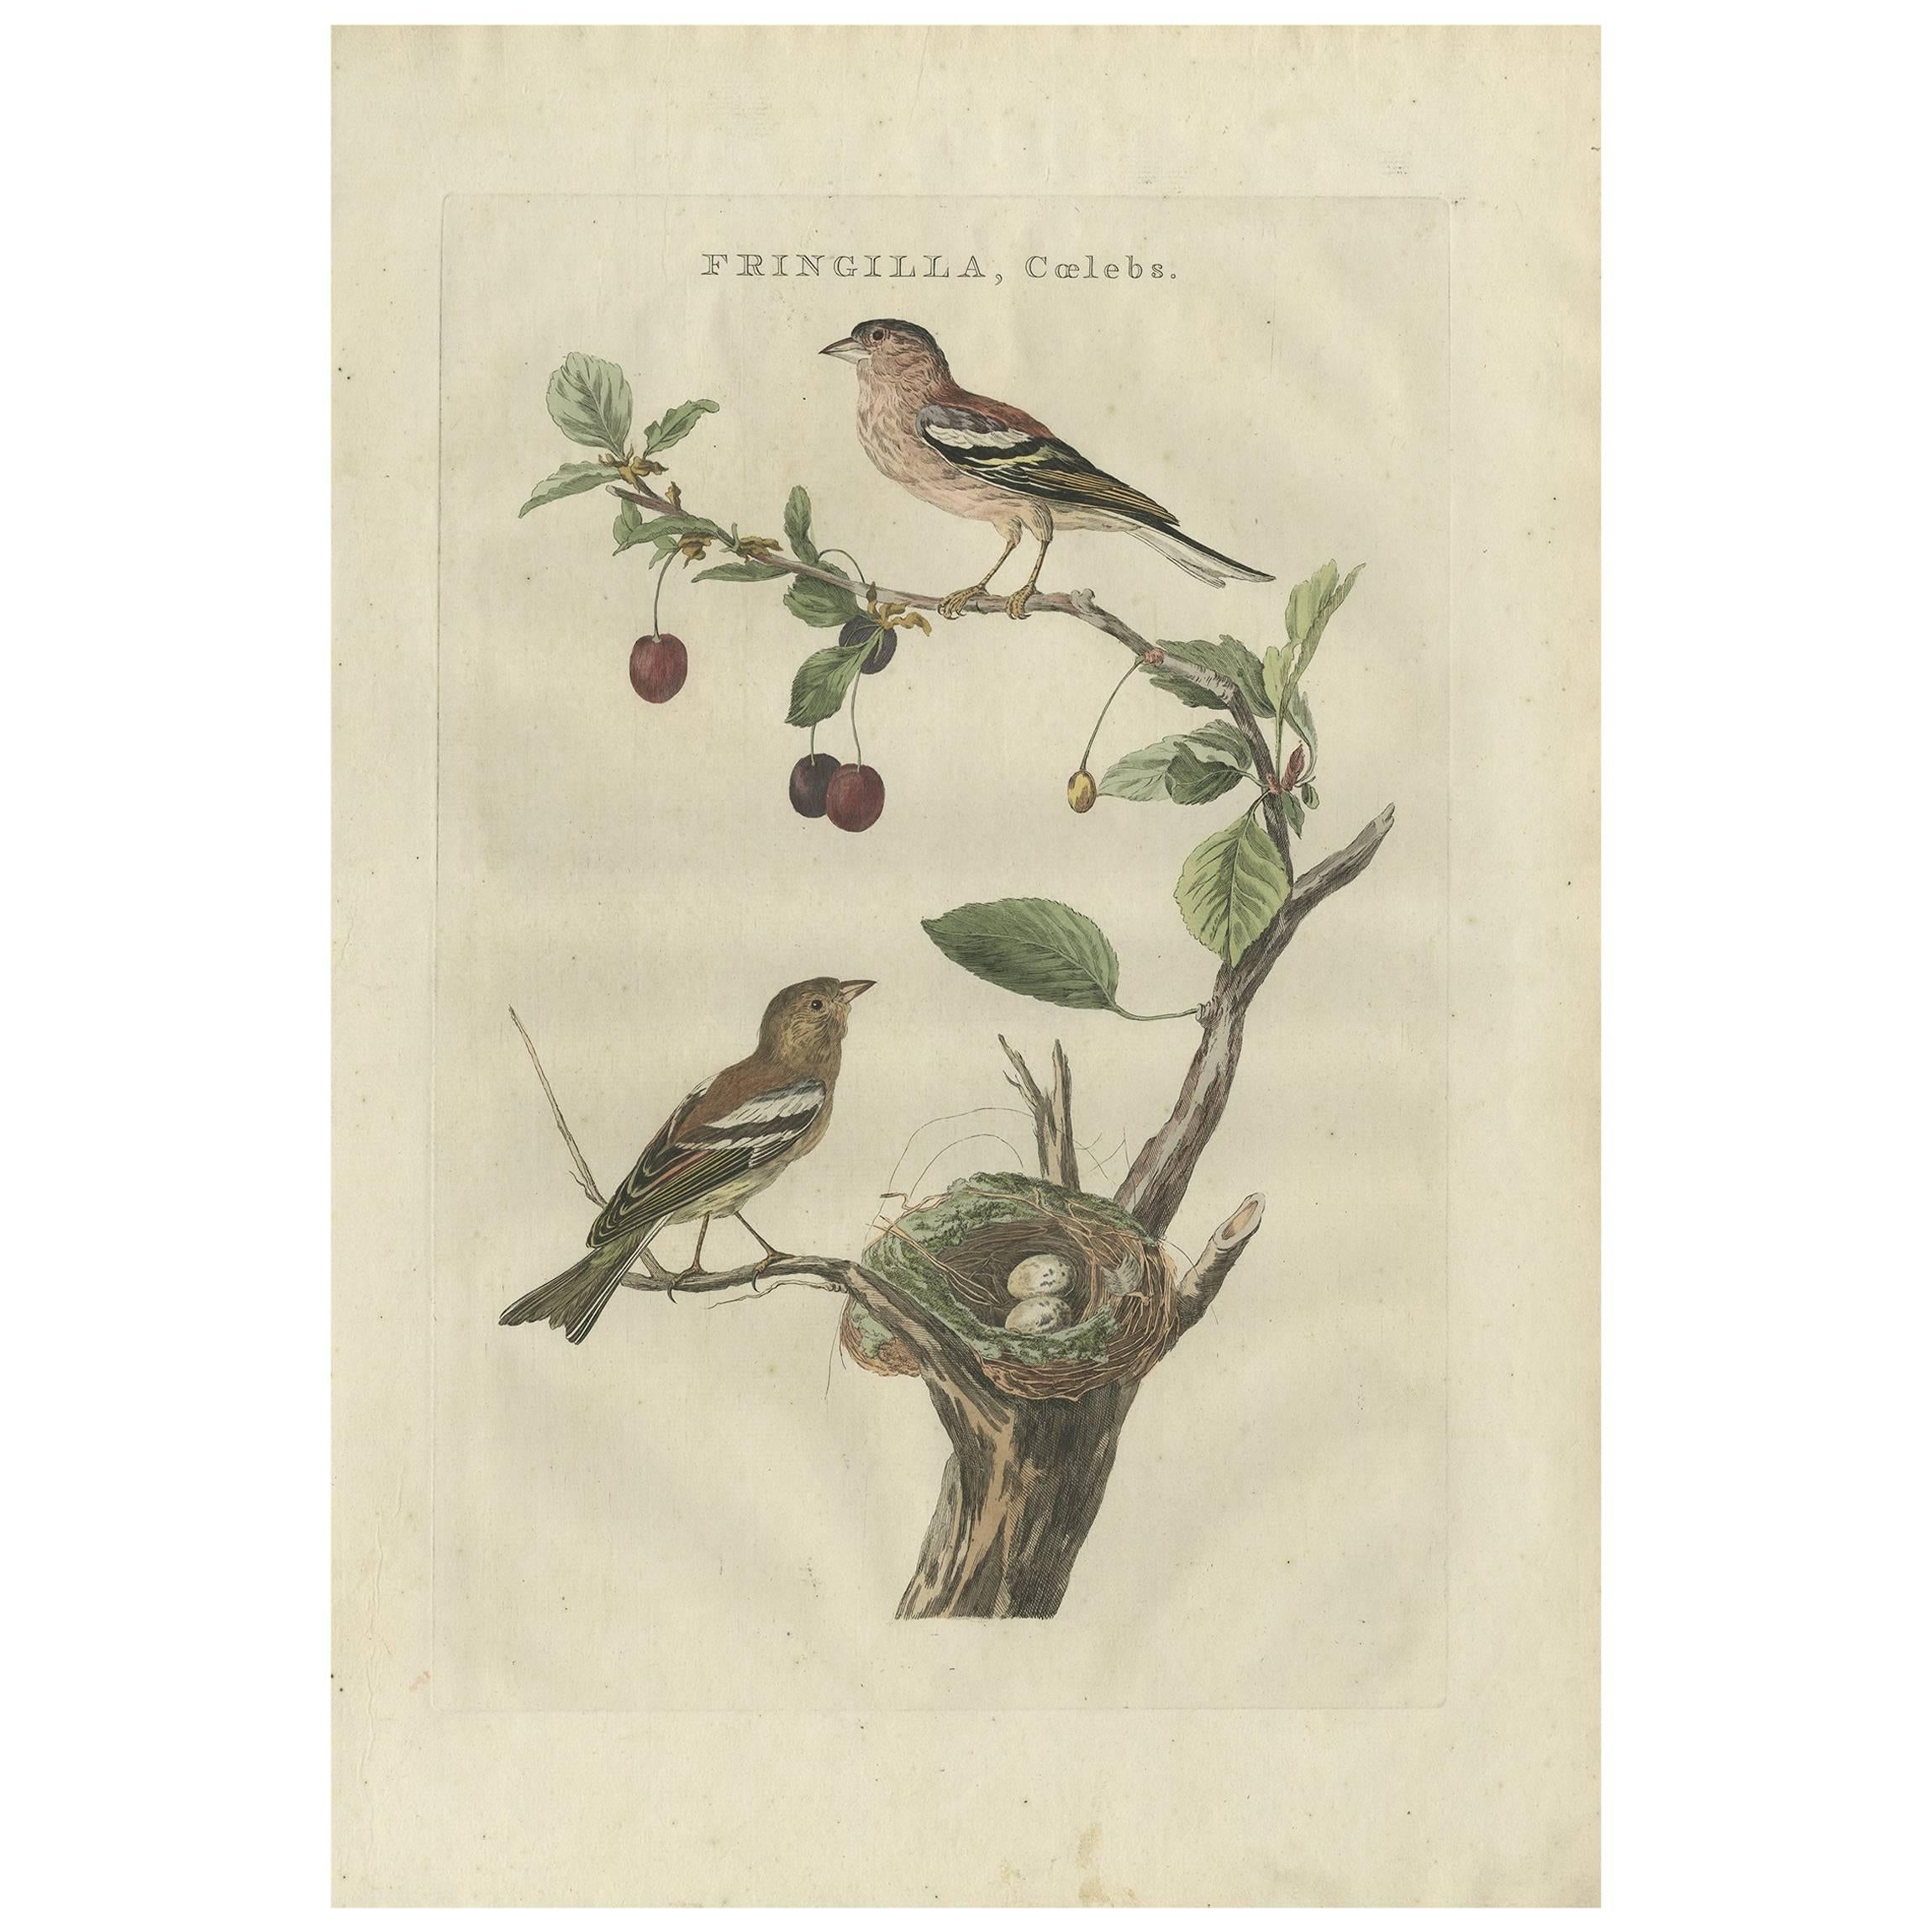 Antique Hand-Colored Bird Print of the Common Chaffinch by Sepp & Nozeman, 1789